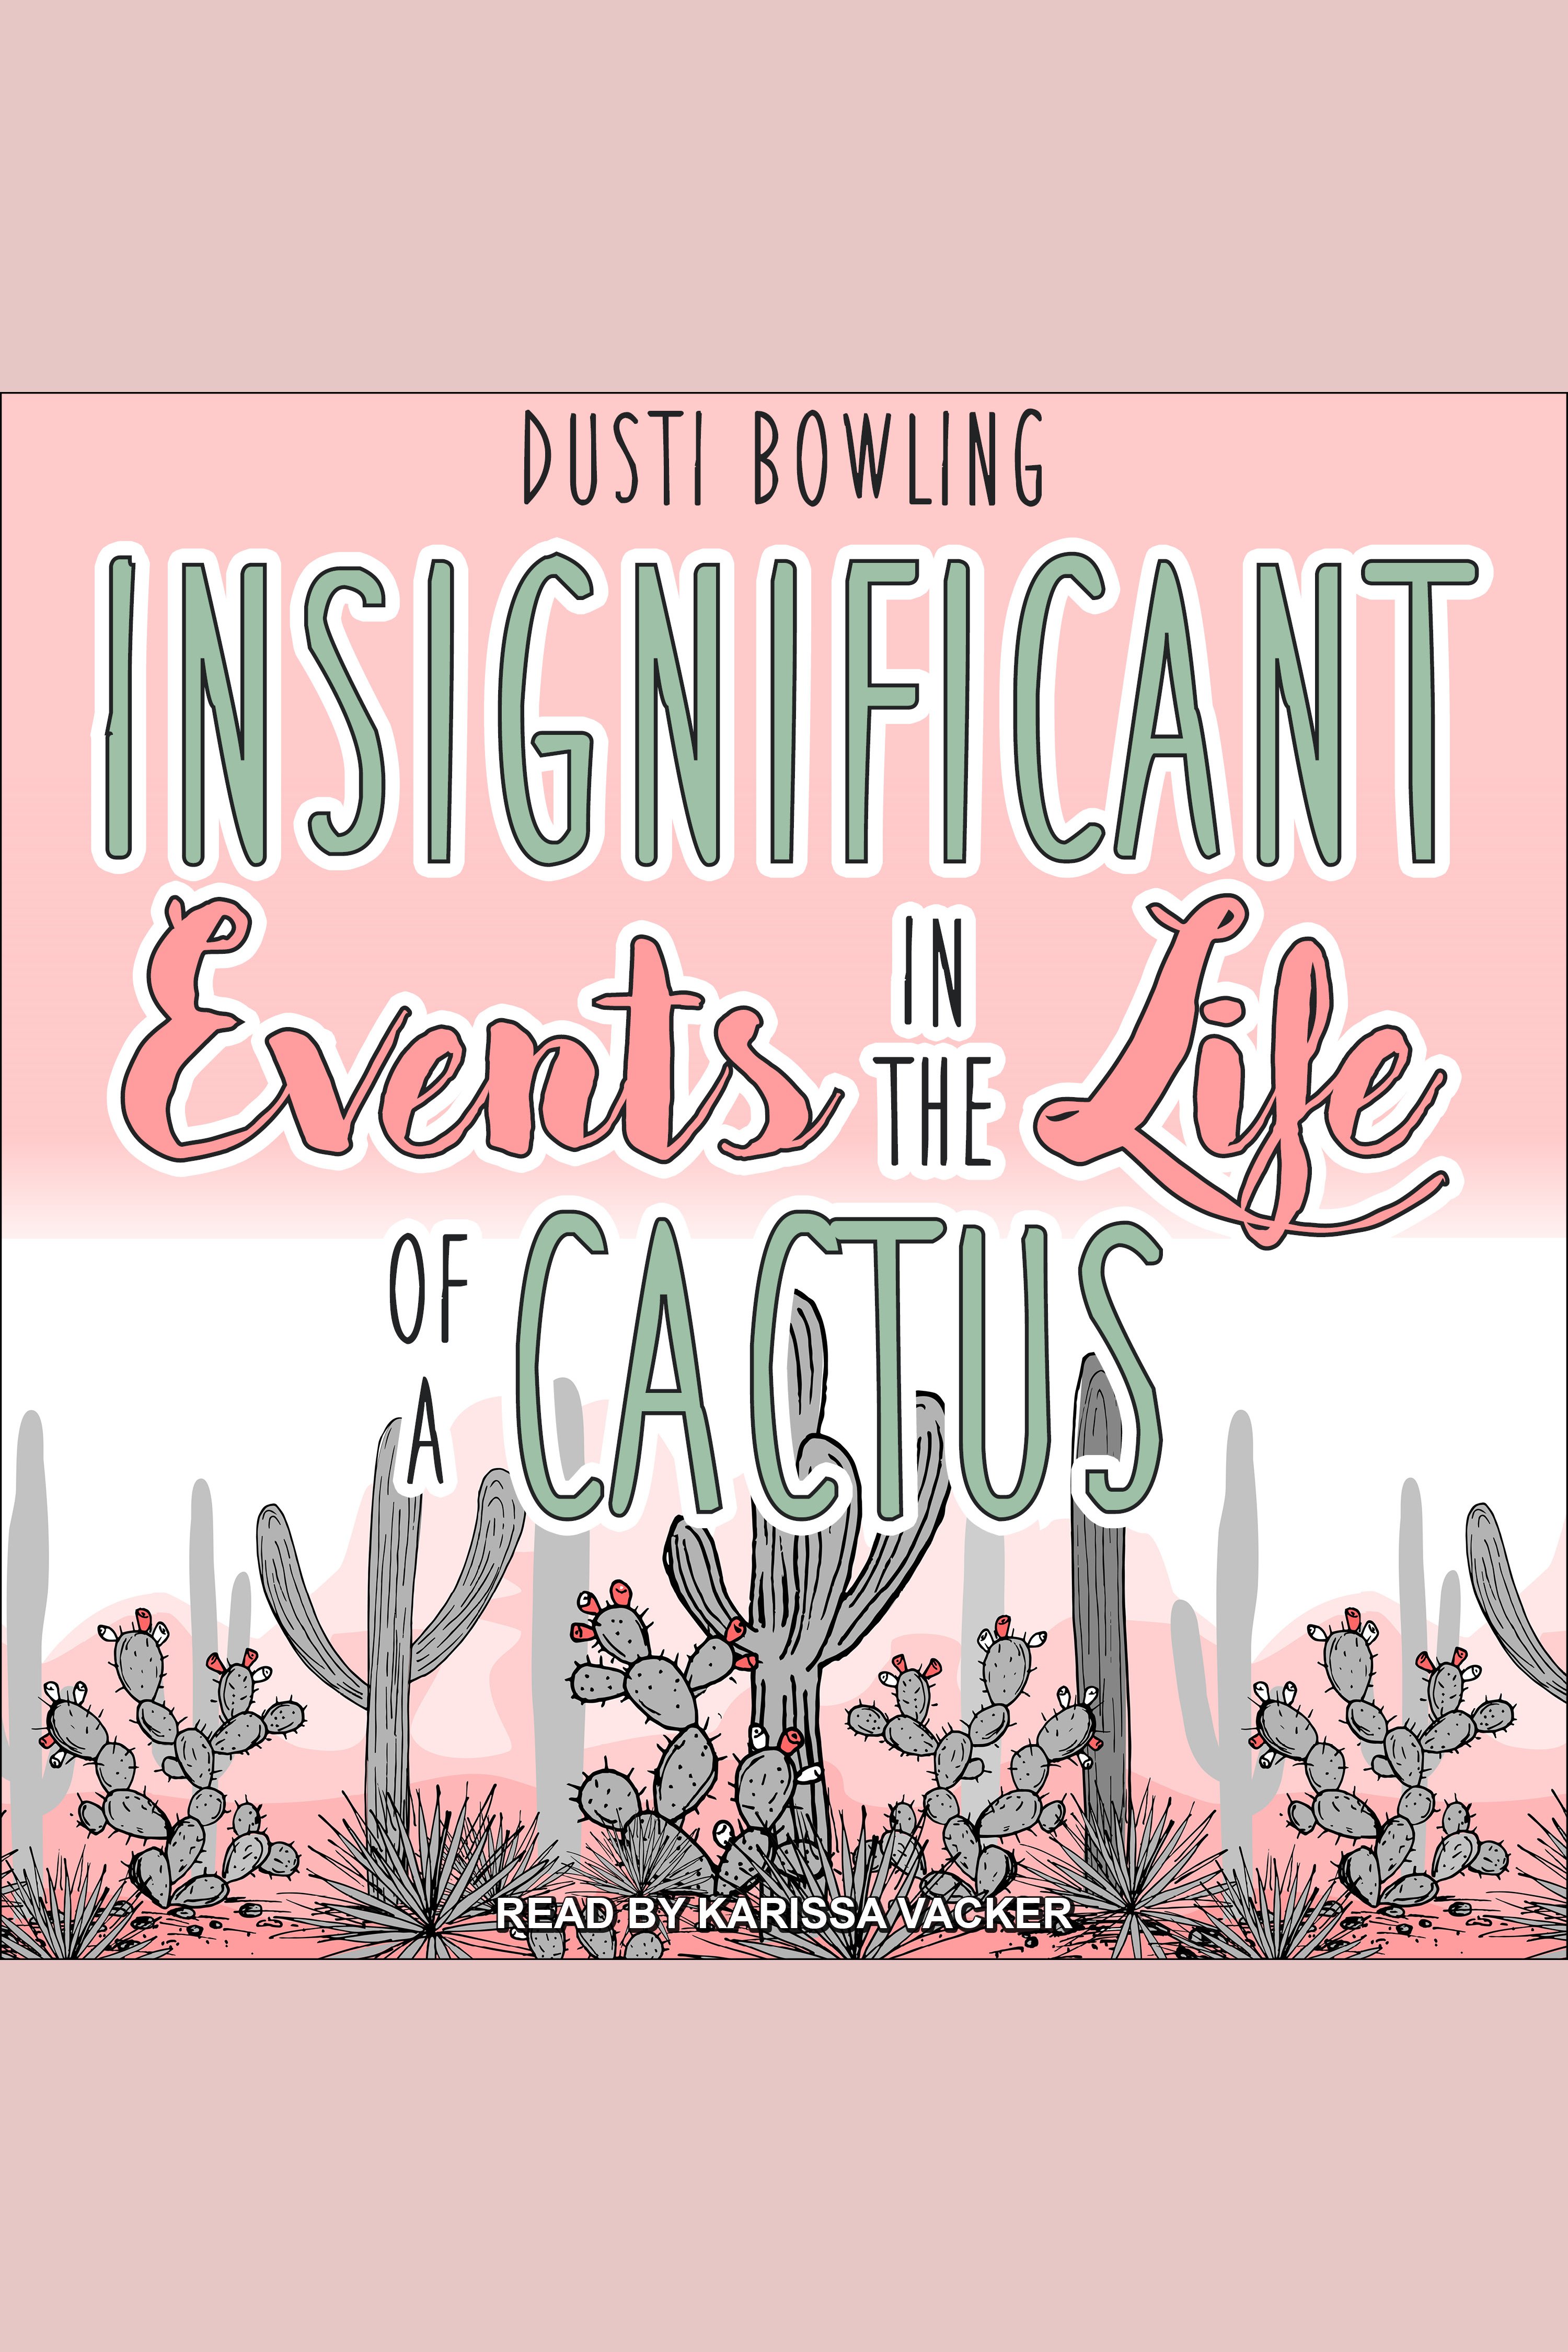 Insignificant events in the life of a cactus cover image